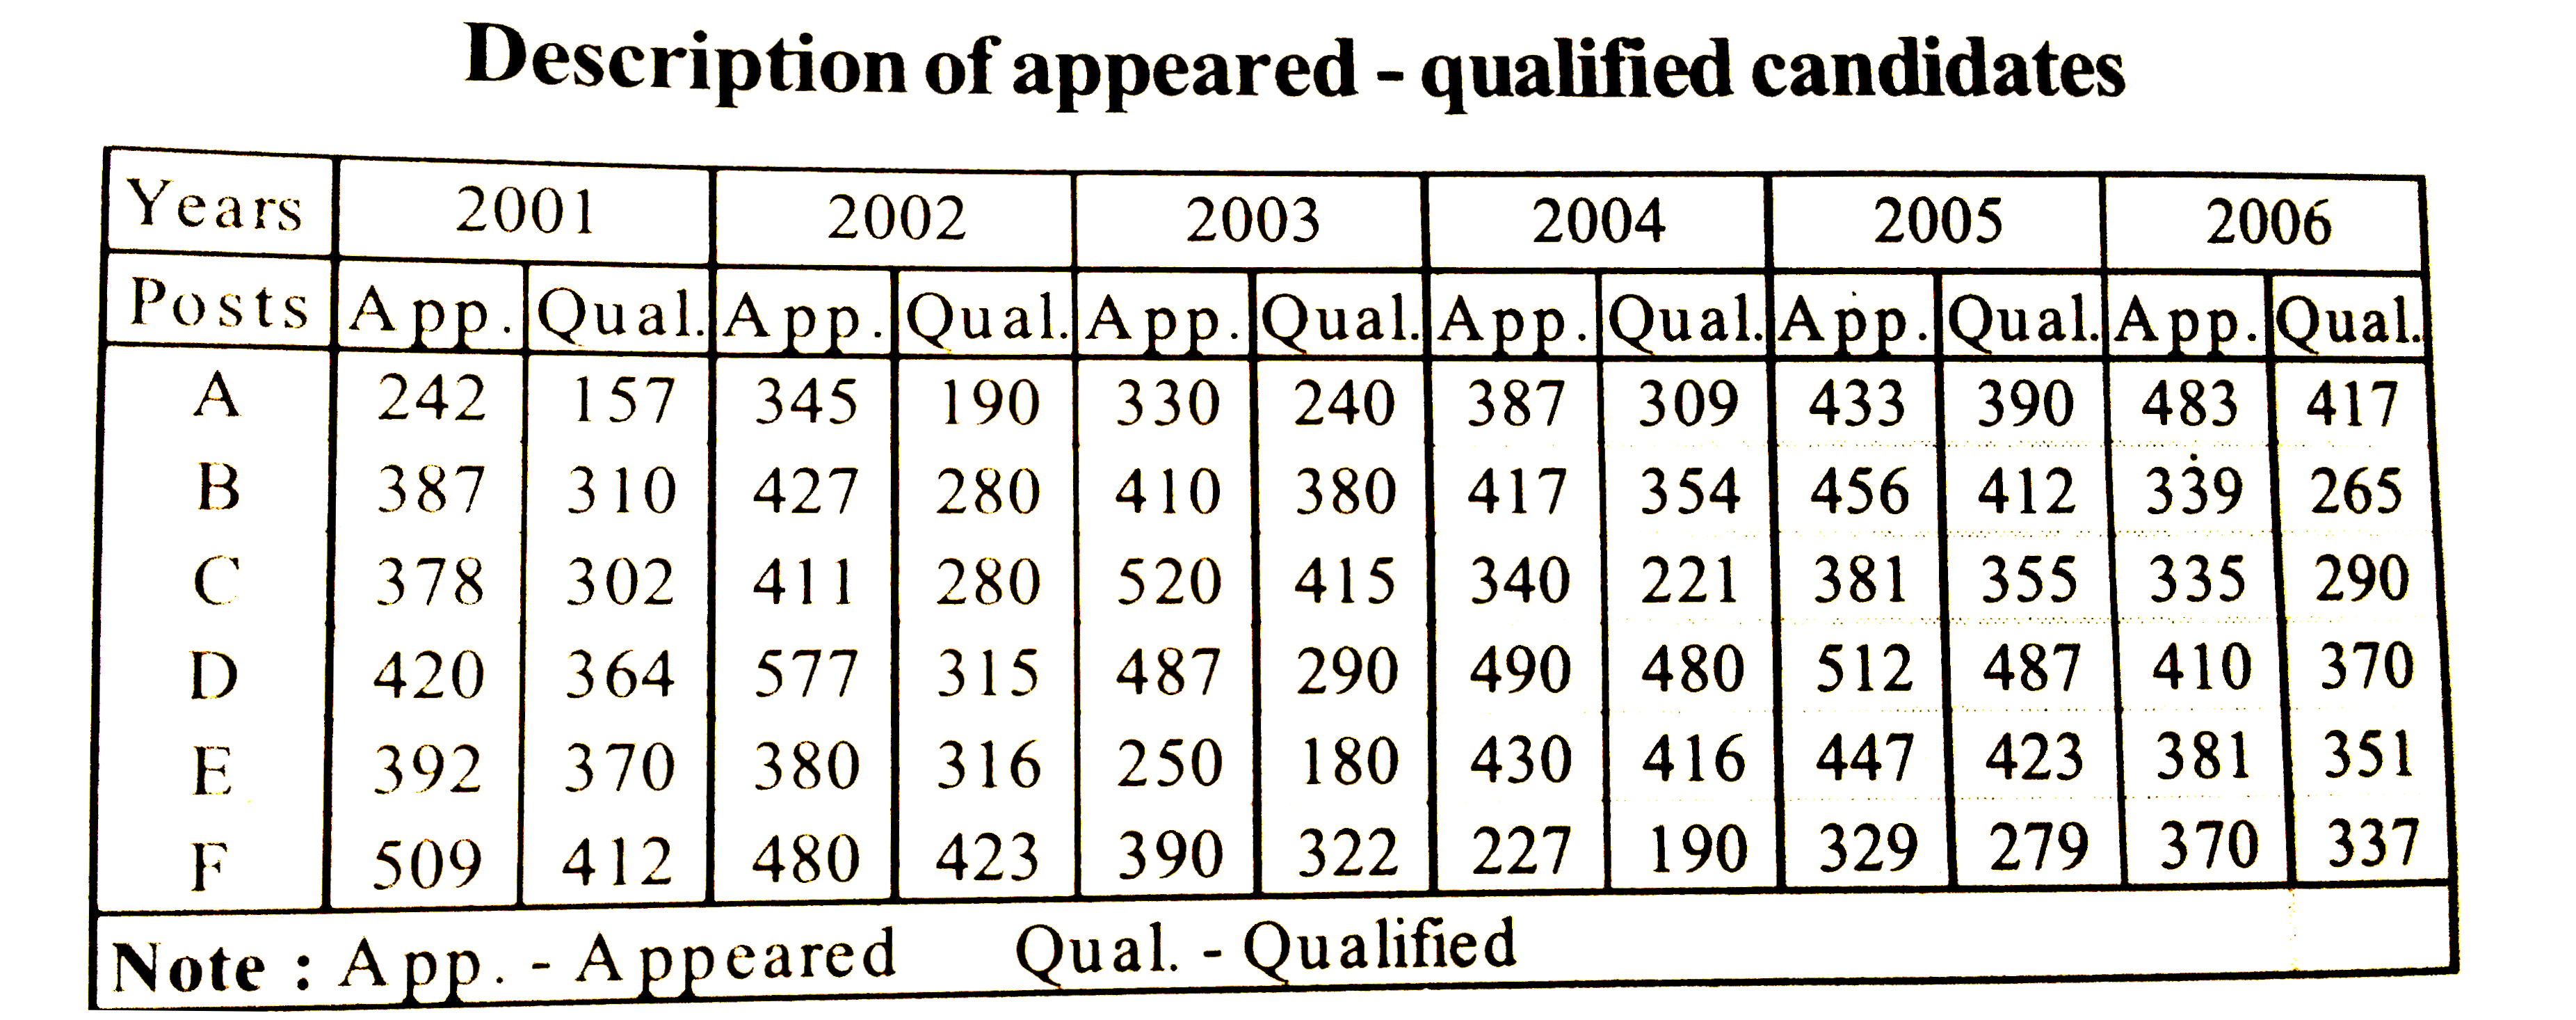 In which year minimum numbr of candidates qualified for the post of  F?